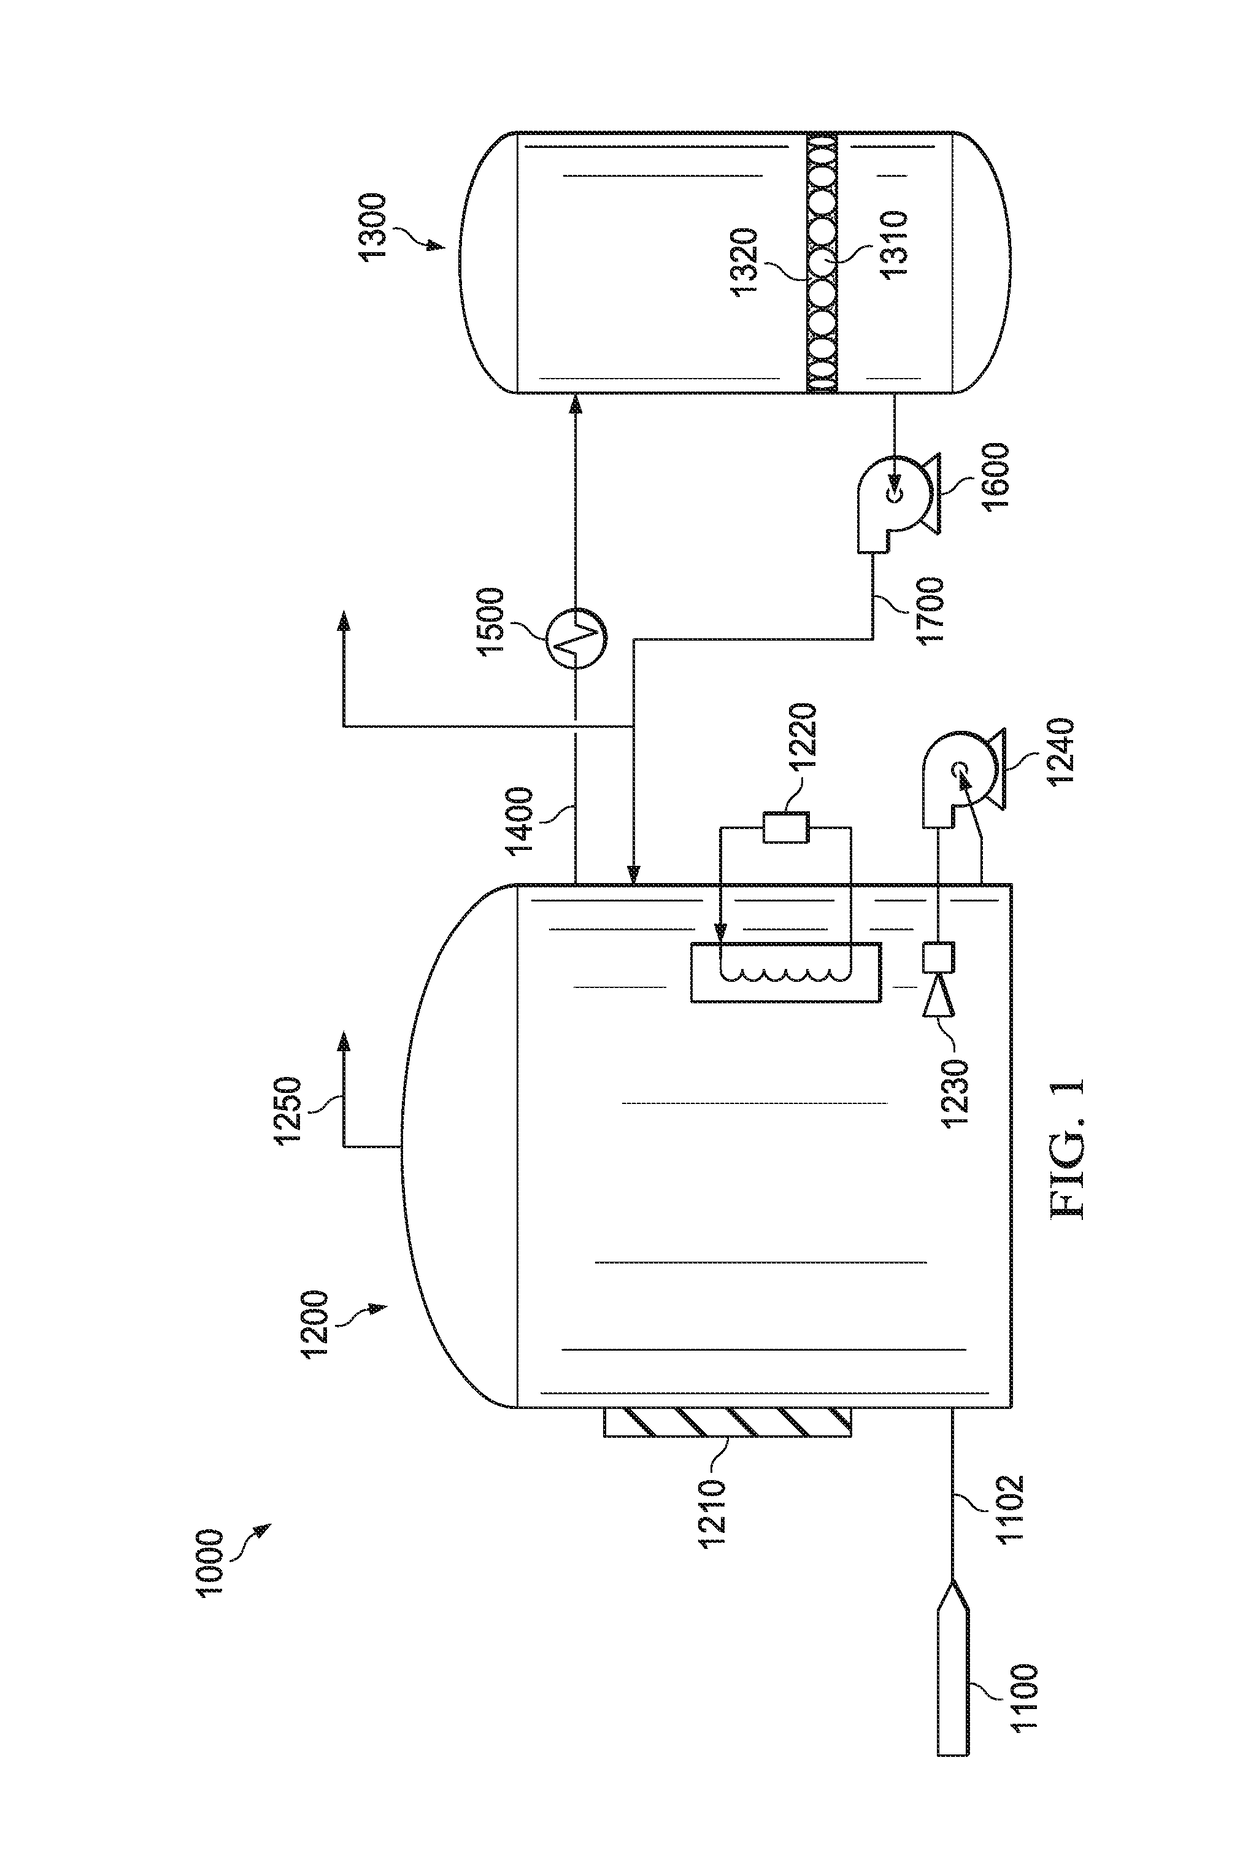 Systems and Methods for Processing Biogas